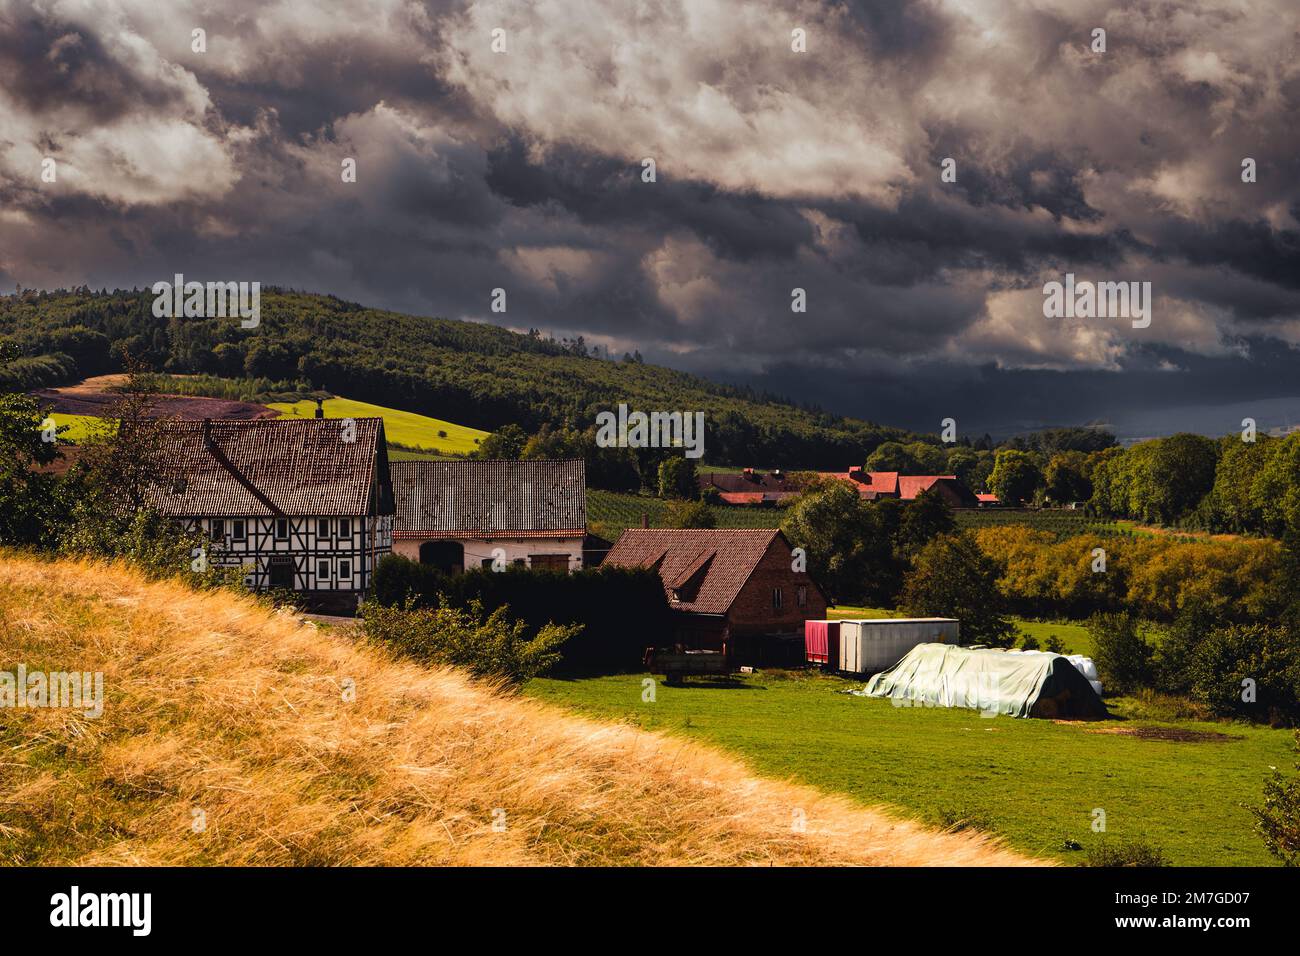 Orpethal, a village in the Rothaar Mountains with an approaching thunderstorm Stock Photo